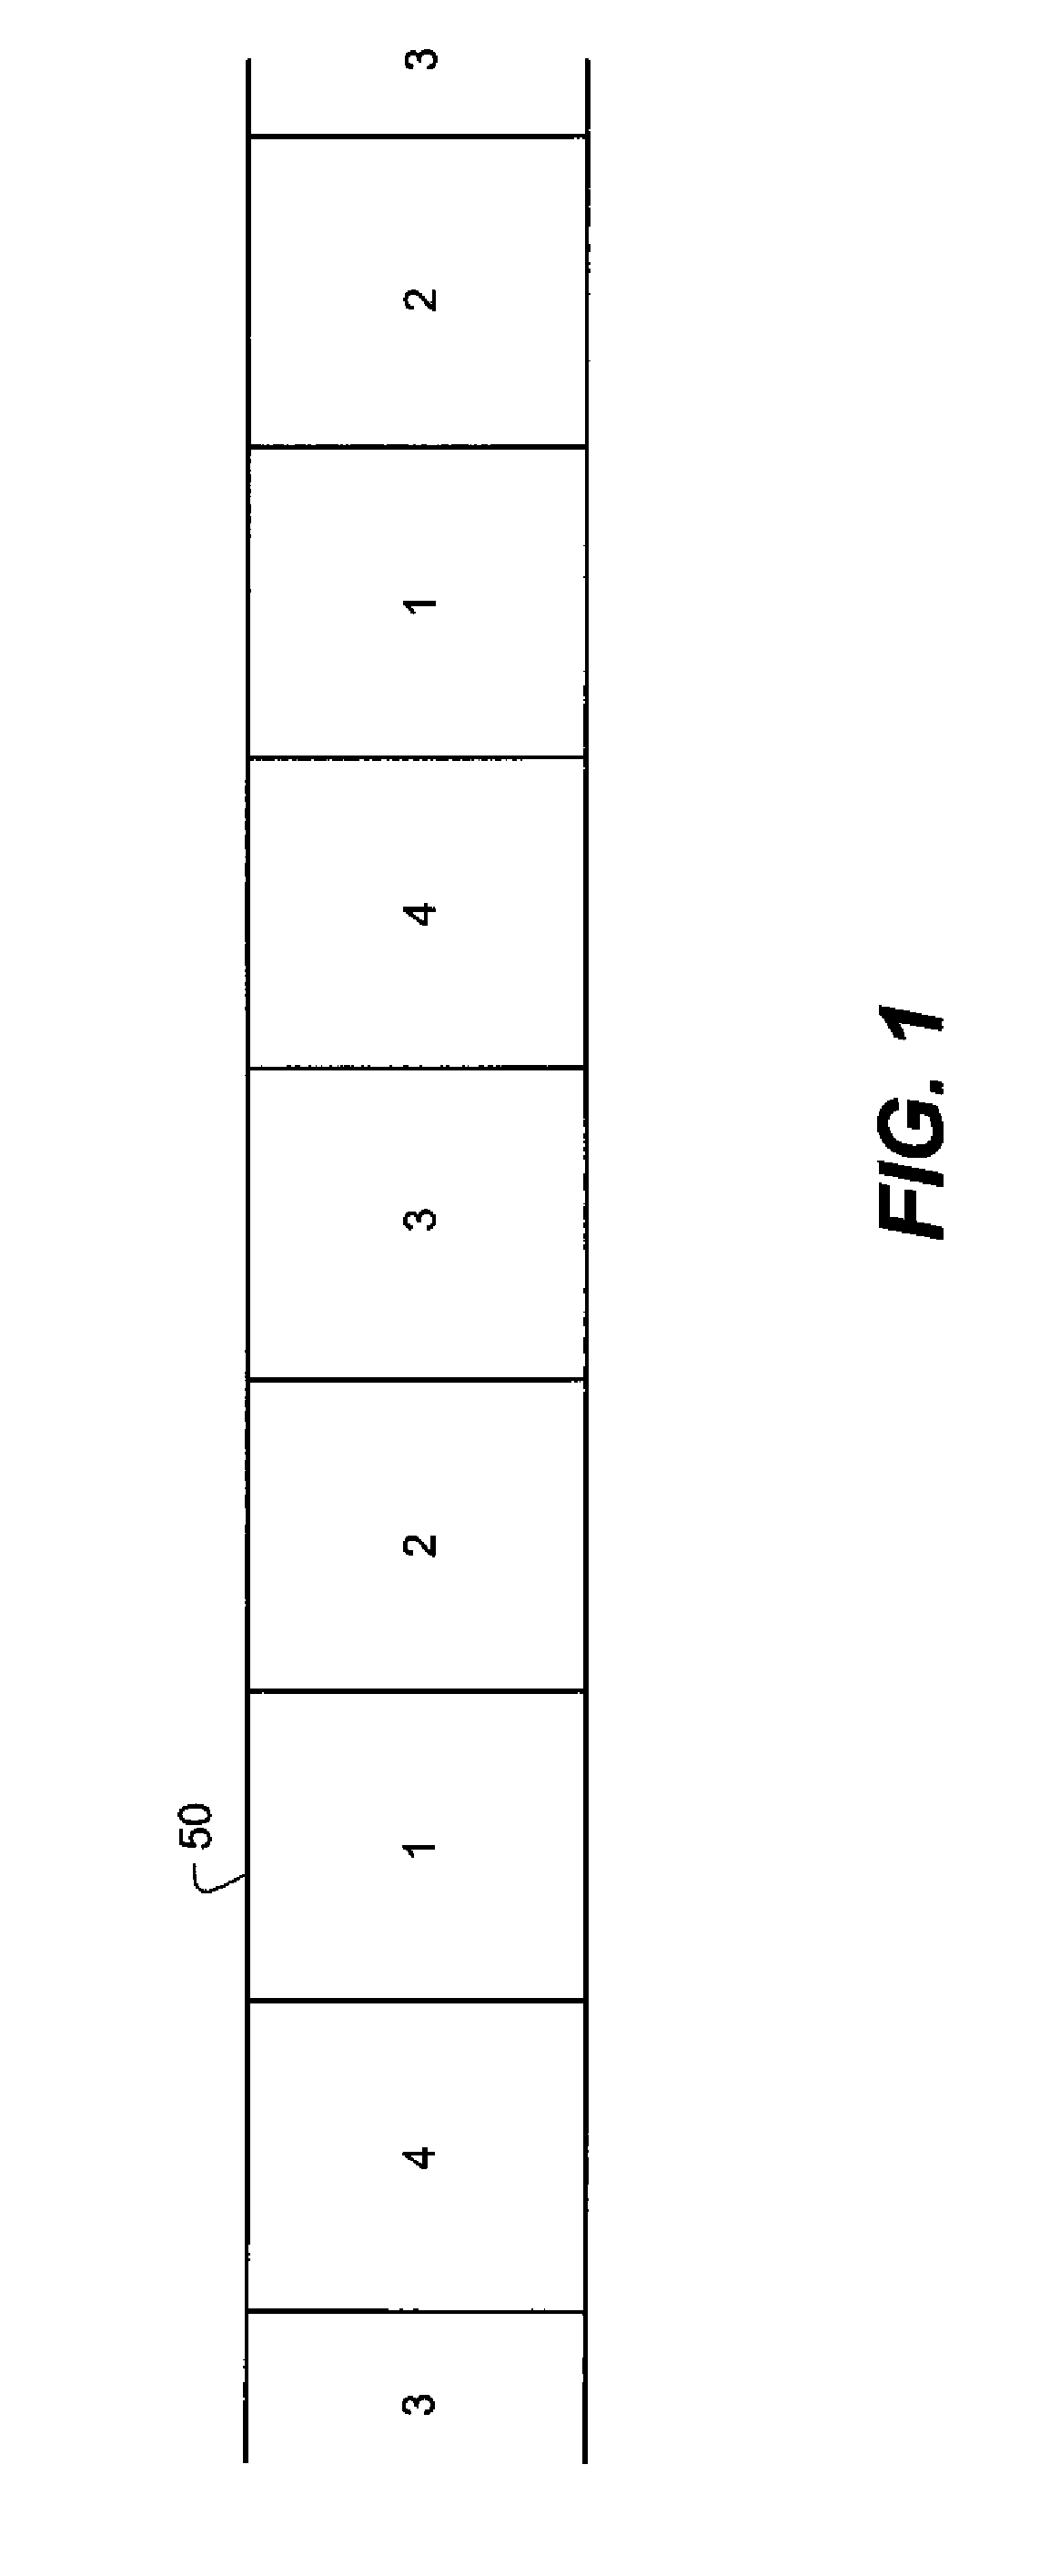 Apparatus for controlling peel position in a printer